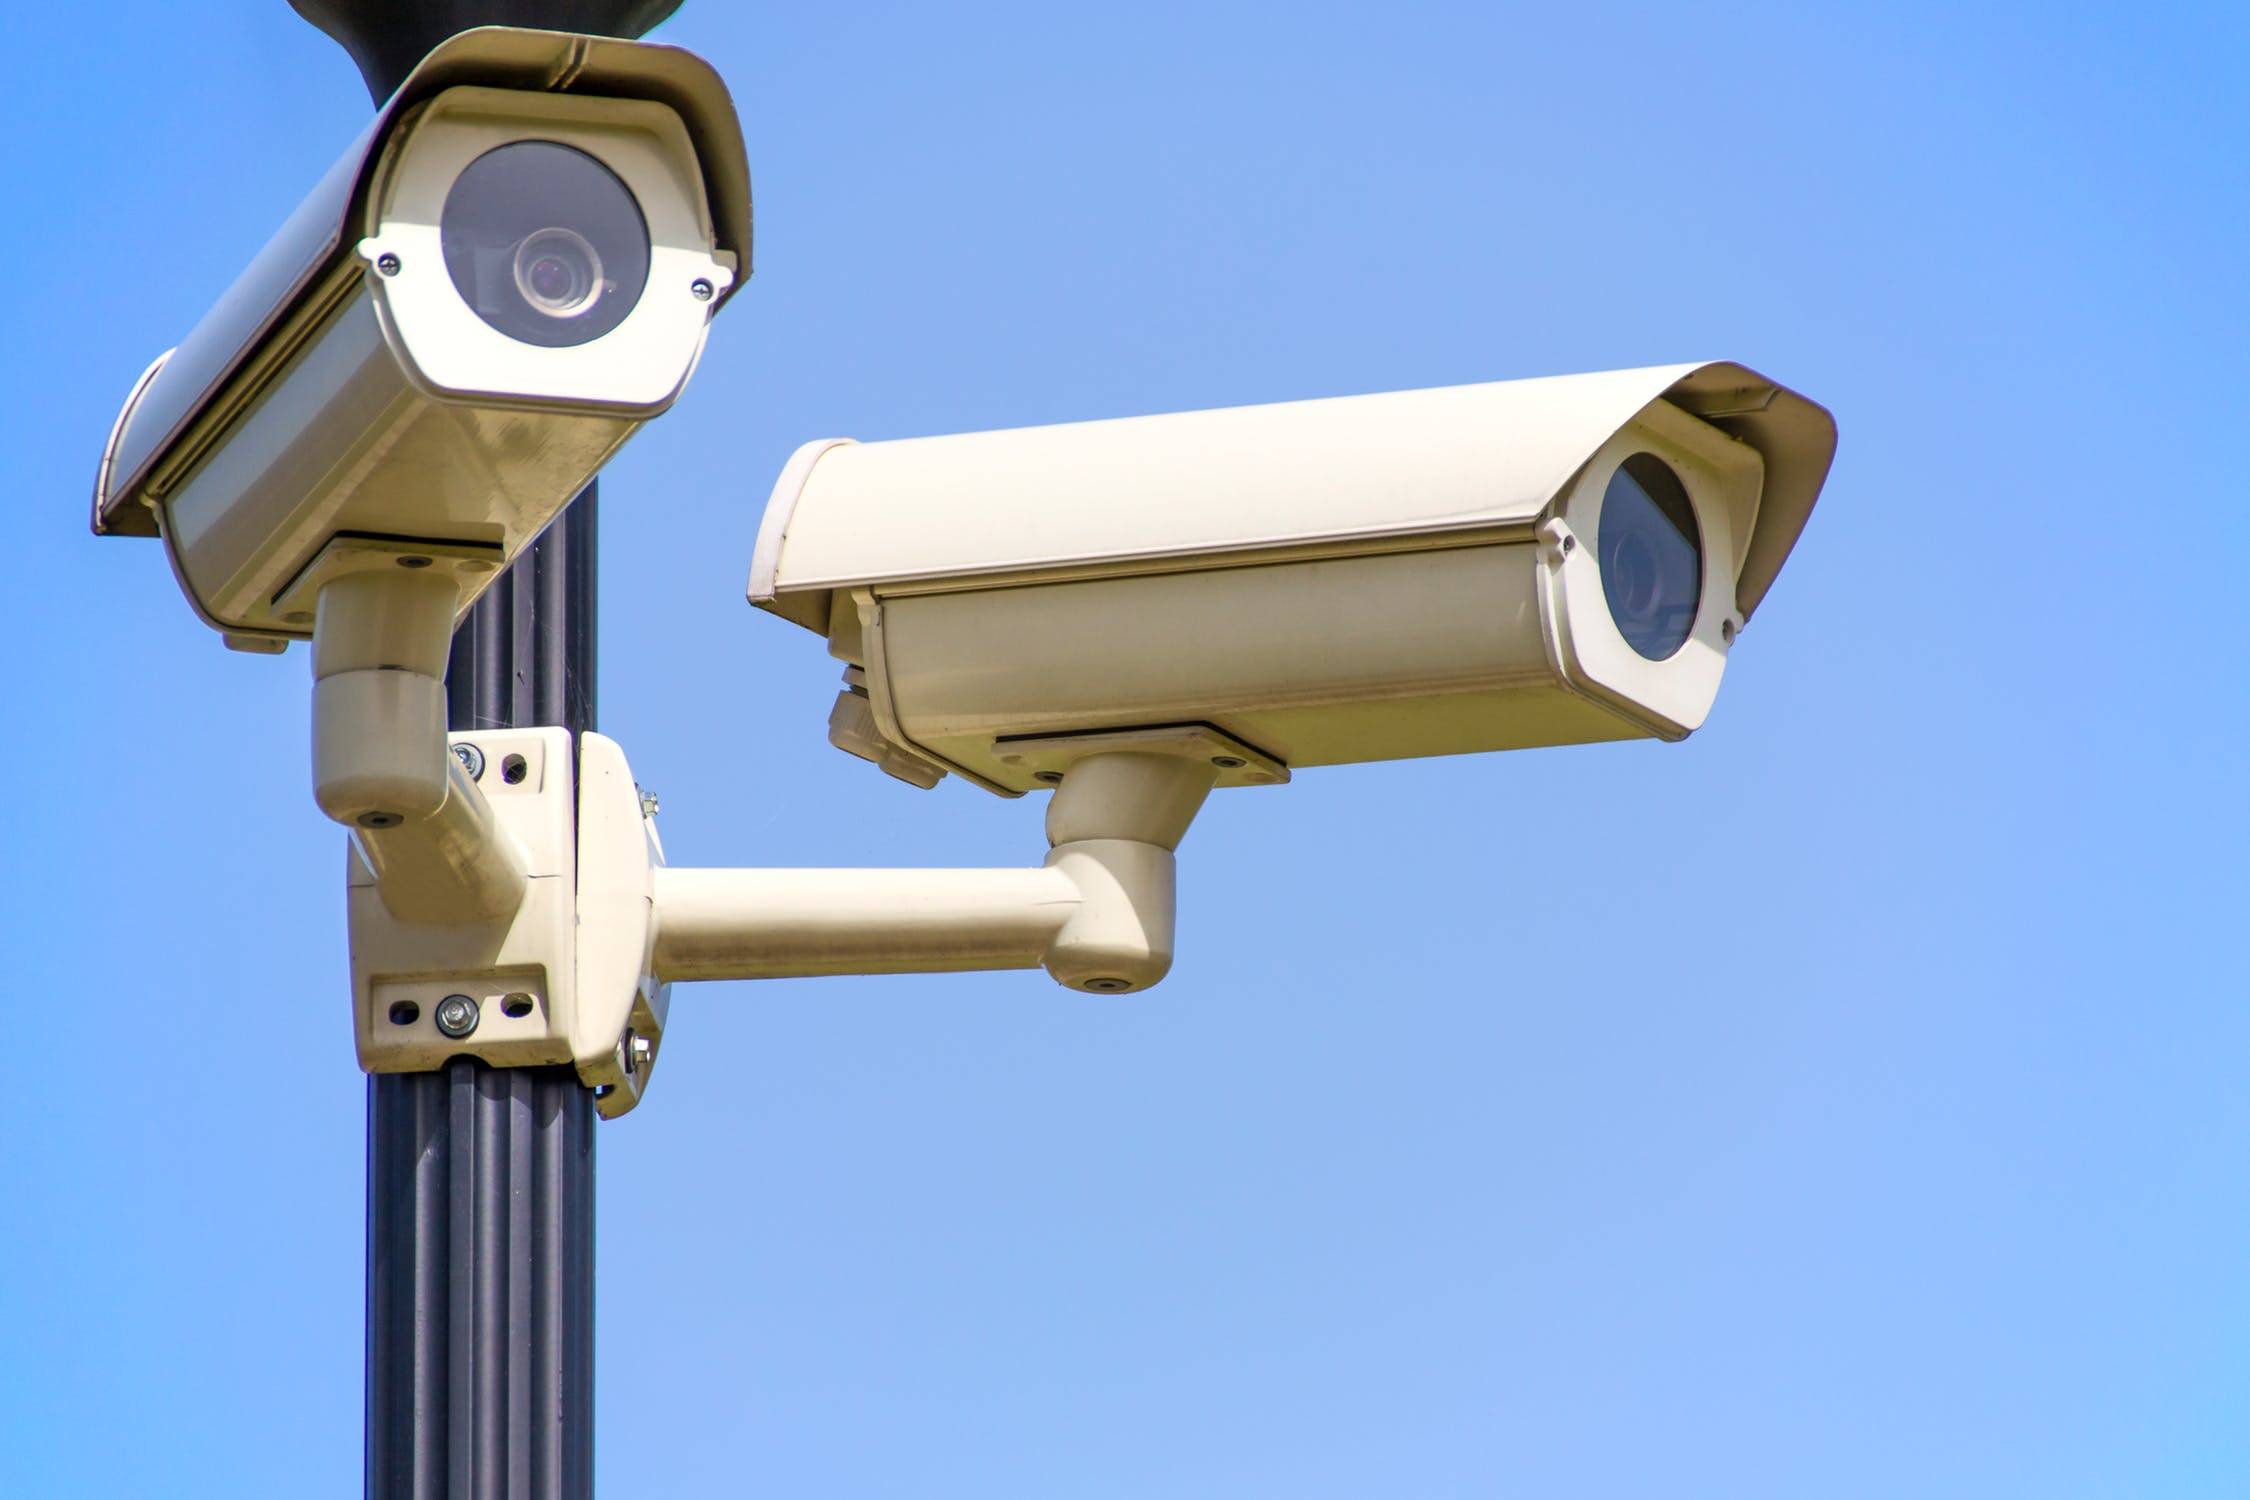 Surveillance Systems Right In School: What Will Be The Result